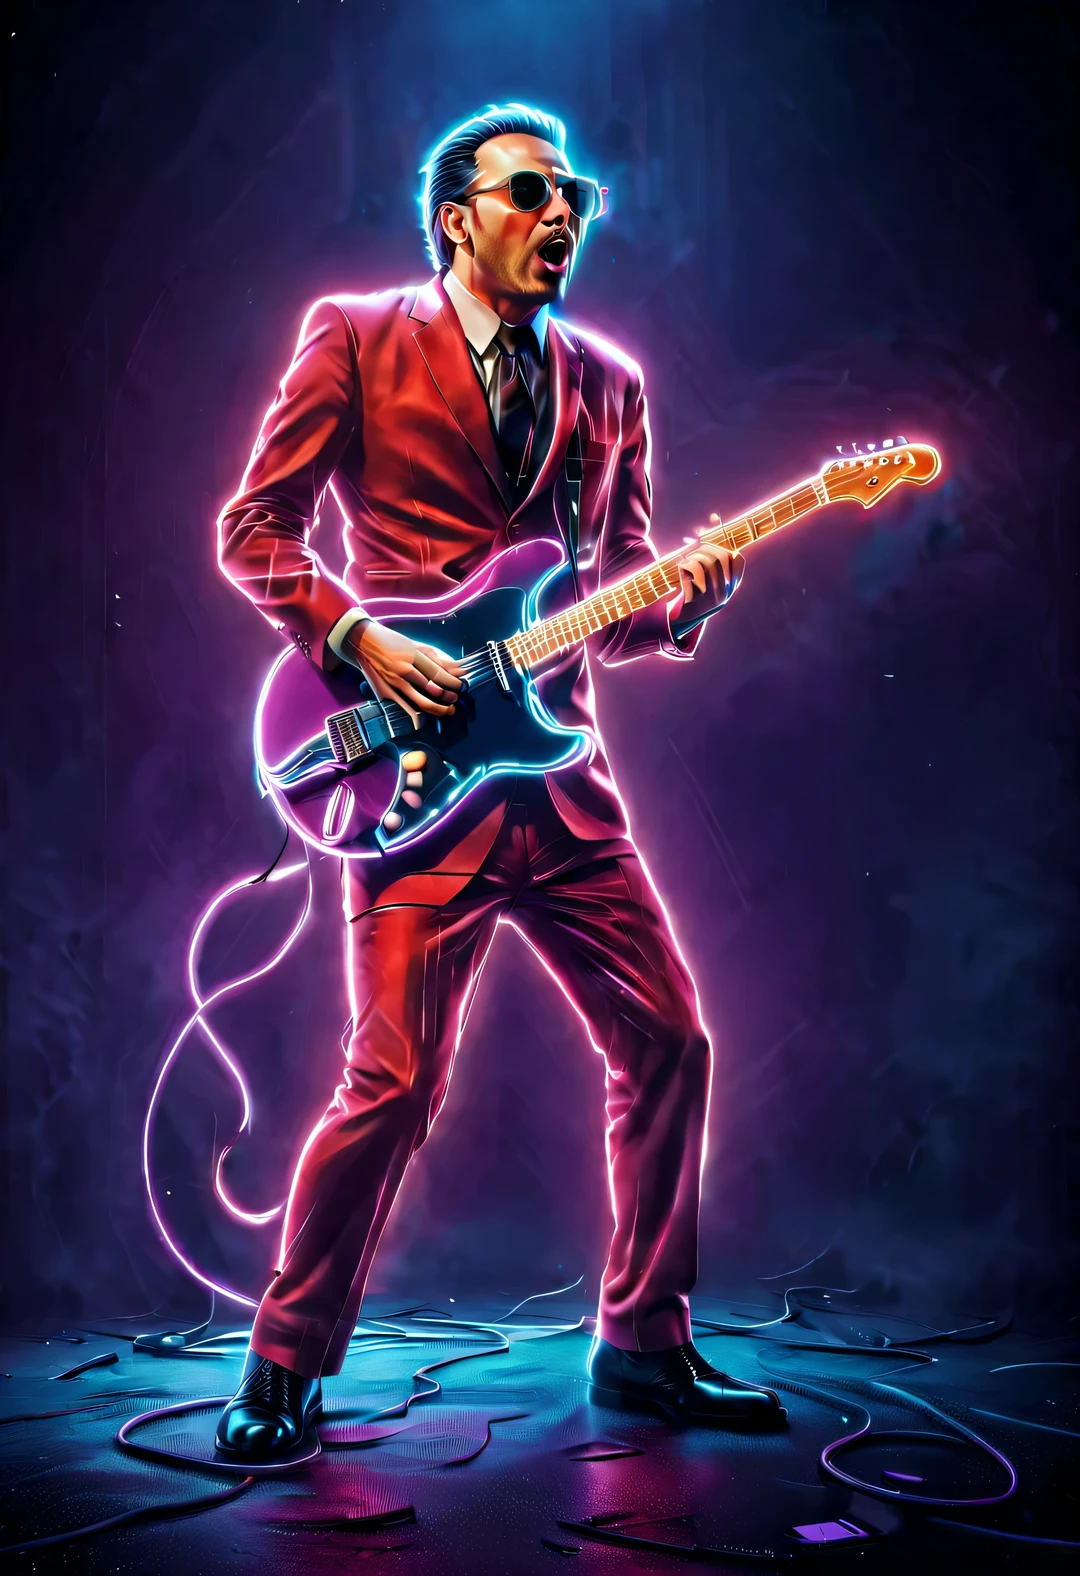 Vector illustration, Minimalism, number, vaporwave style, Beautiful and meticulous illustrations, A little more purple， （A man wearing a red suit、1980s man wearing sunglasses playing electric guitar）， dynamic poses，Crazy dynamic playing and singing postures，big singer，Floor-standing Mac model，Many electroacoustic band instruments，background：rock concert，dramatic lighting, Trends on ArtStation, Award-winning, Icons are very detailed